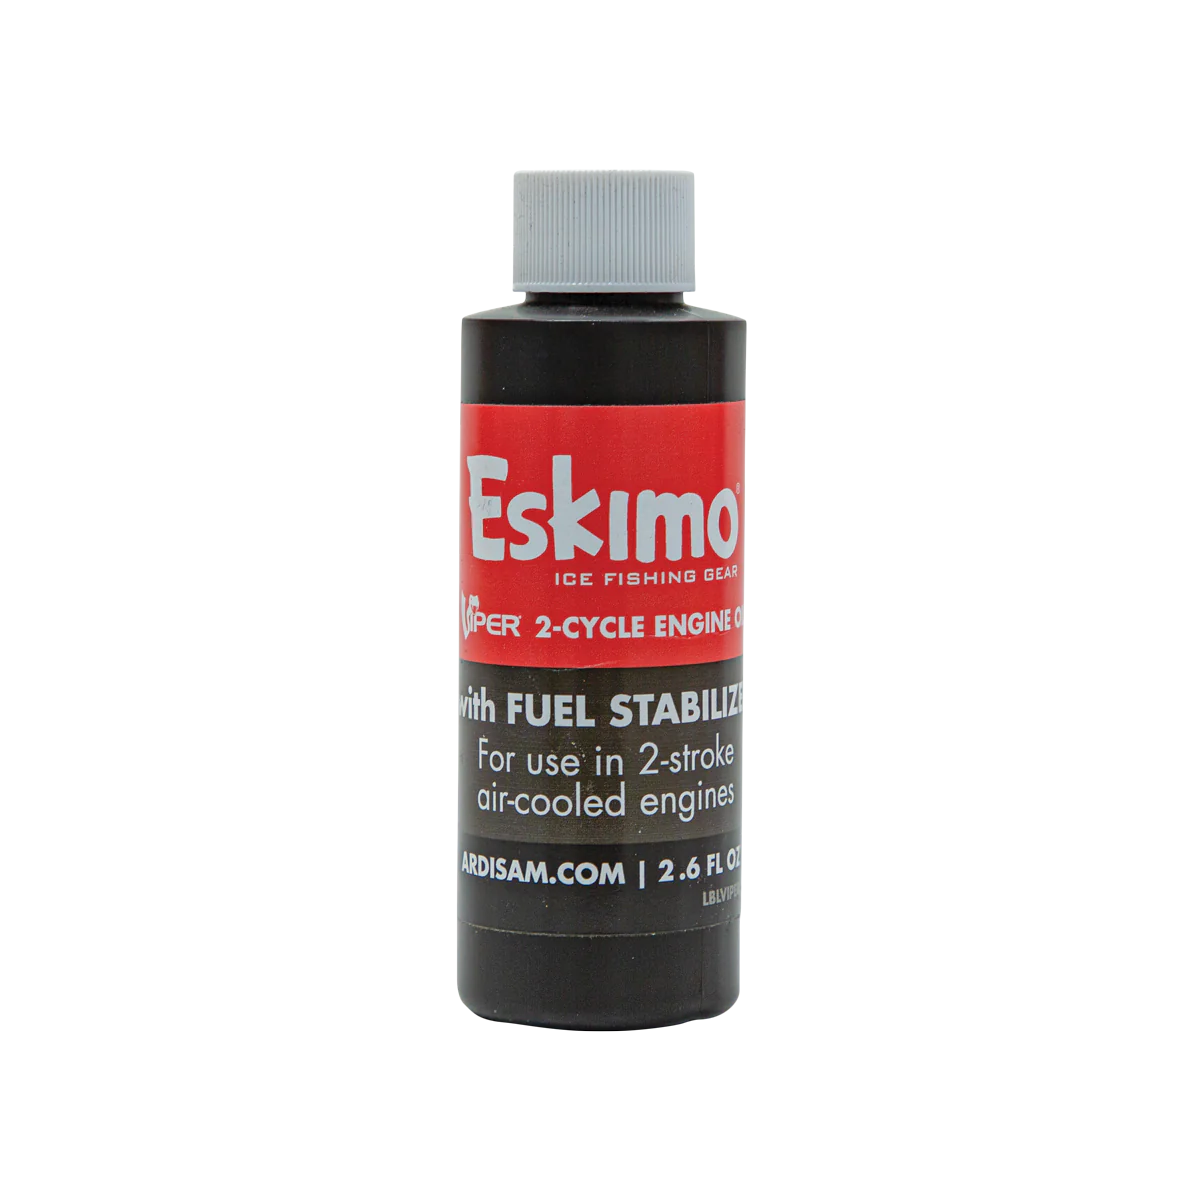 Eskimo Viper 2-Cycle Engine Oil – Jack Traps Ice Fishing Traps and